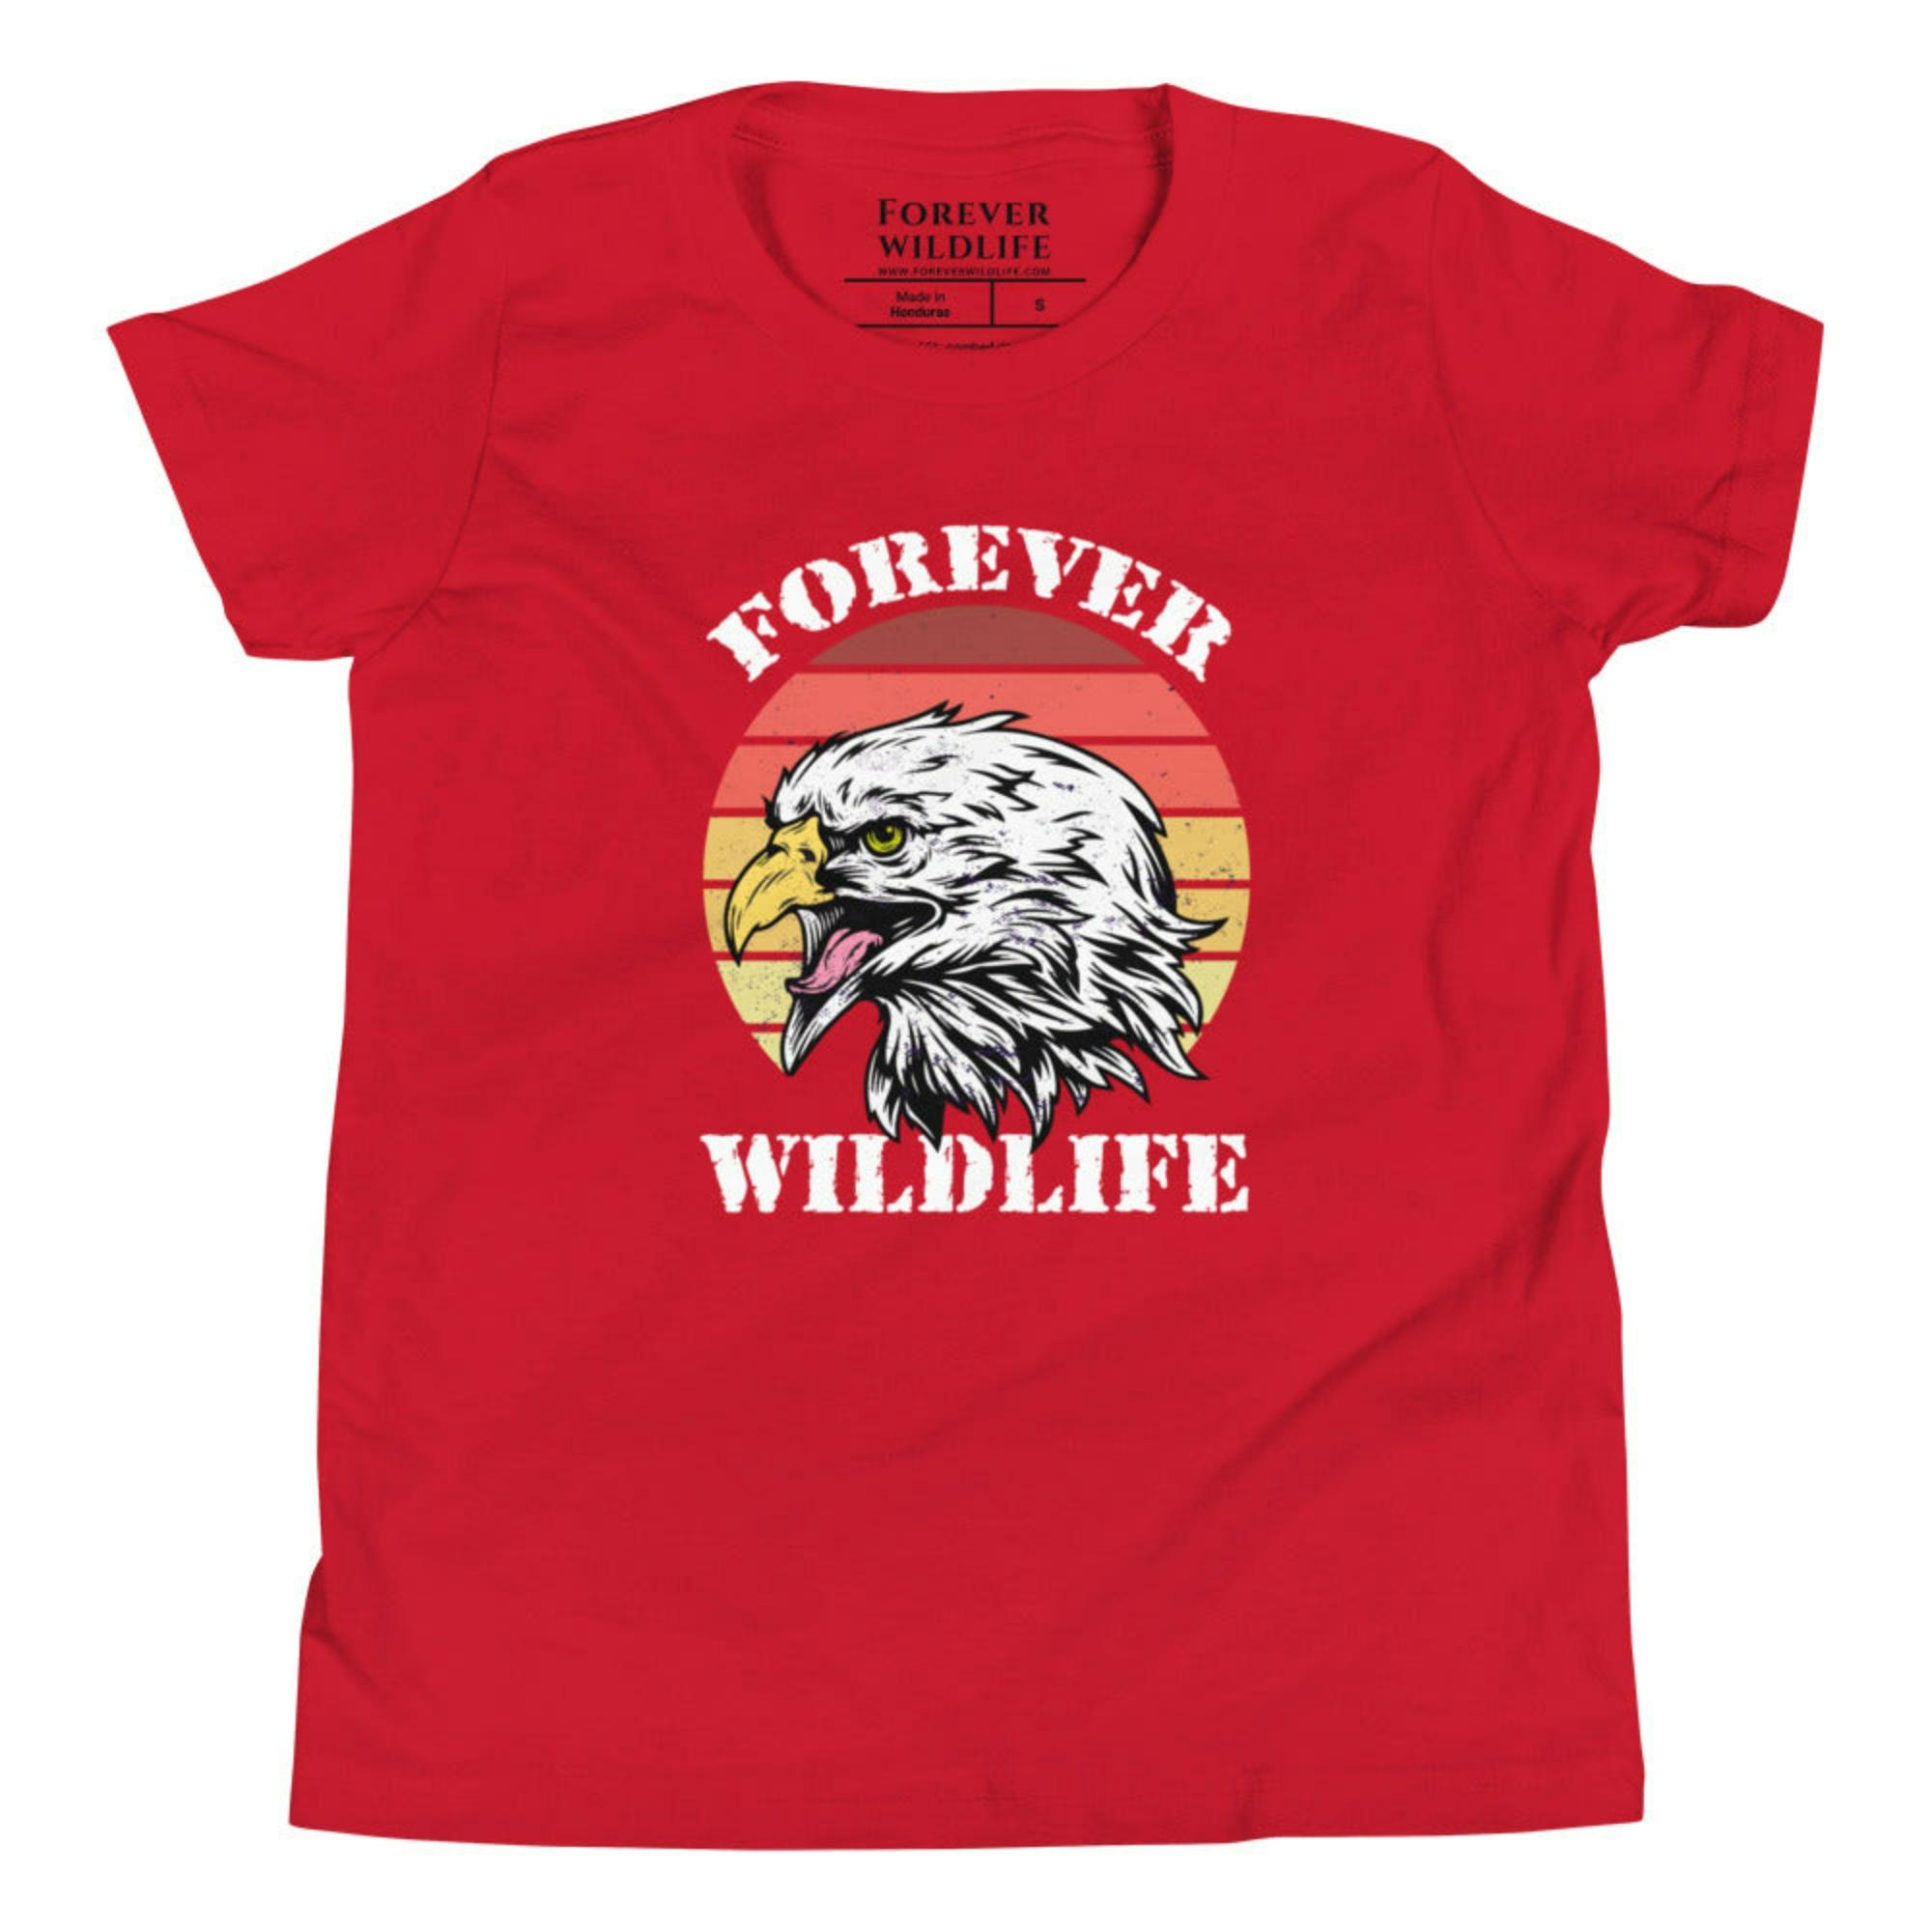 Red Youth T-Shirt with Eagle graphic as part of Wildlife T Shirts, Wildlife Clothing & Apparel by Forever Wildlife 